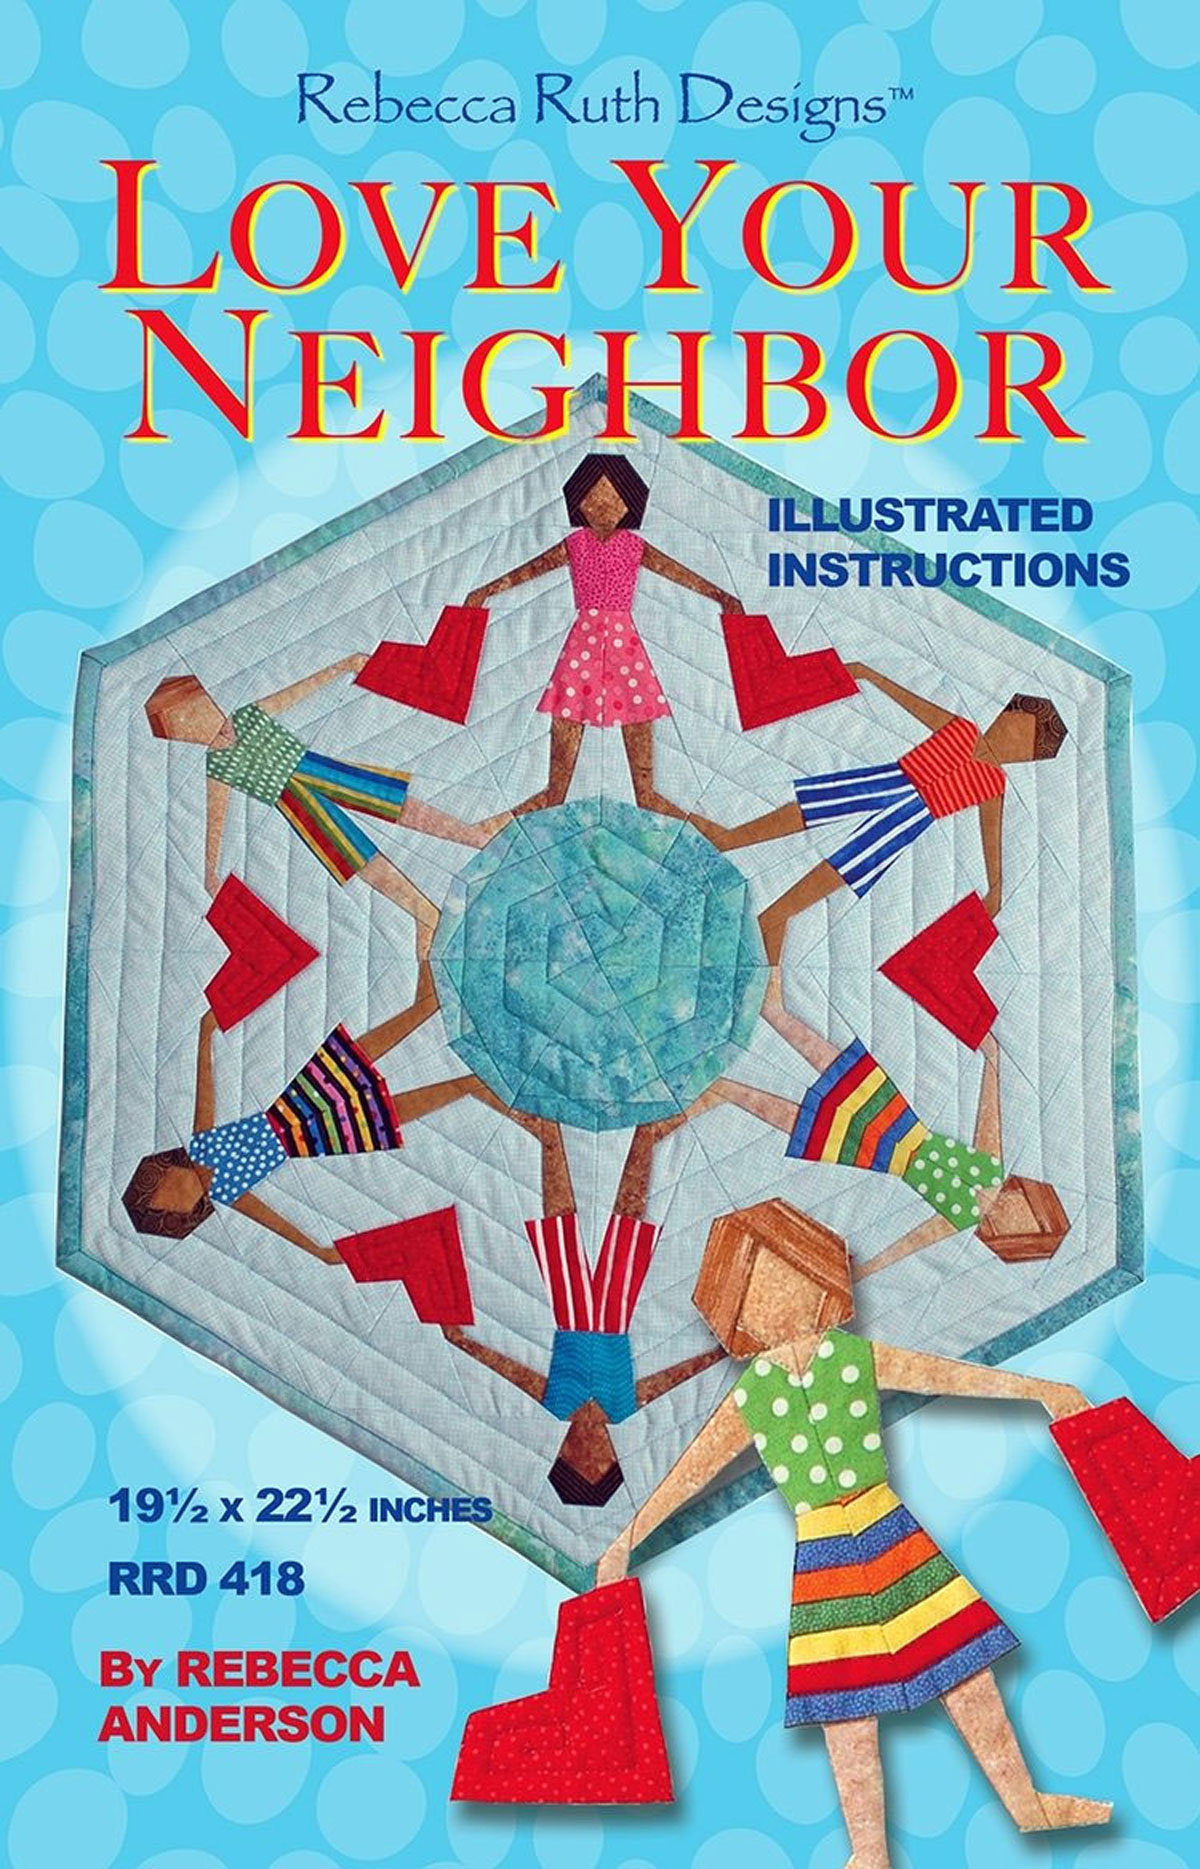 Love-Your-Neighbor-table-topper-sewing-pattern-rebecca-ruth-designs-front